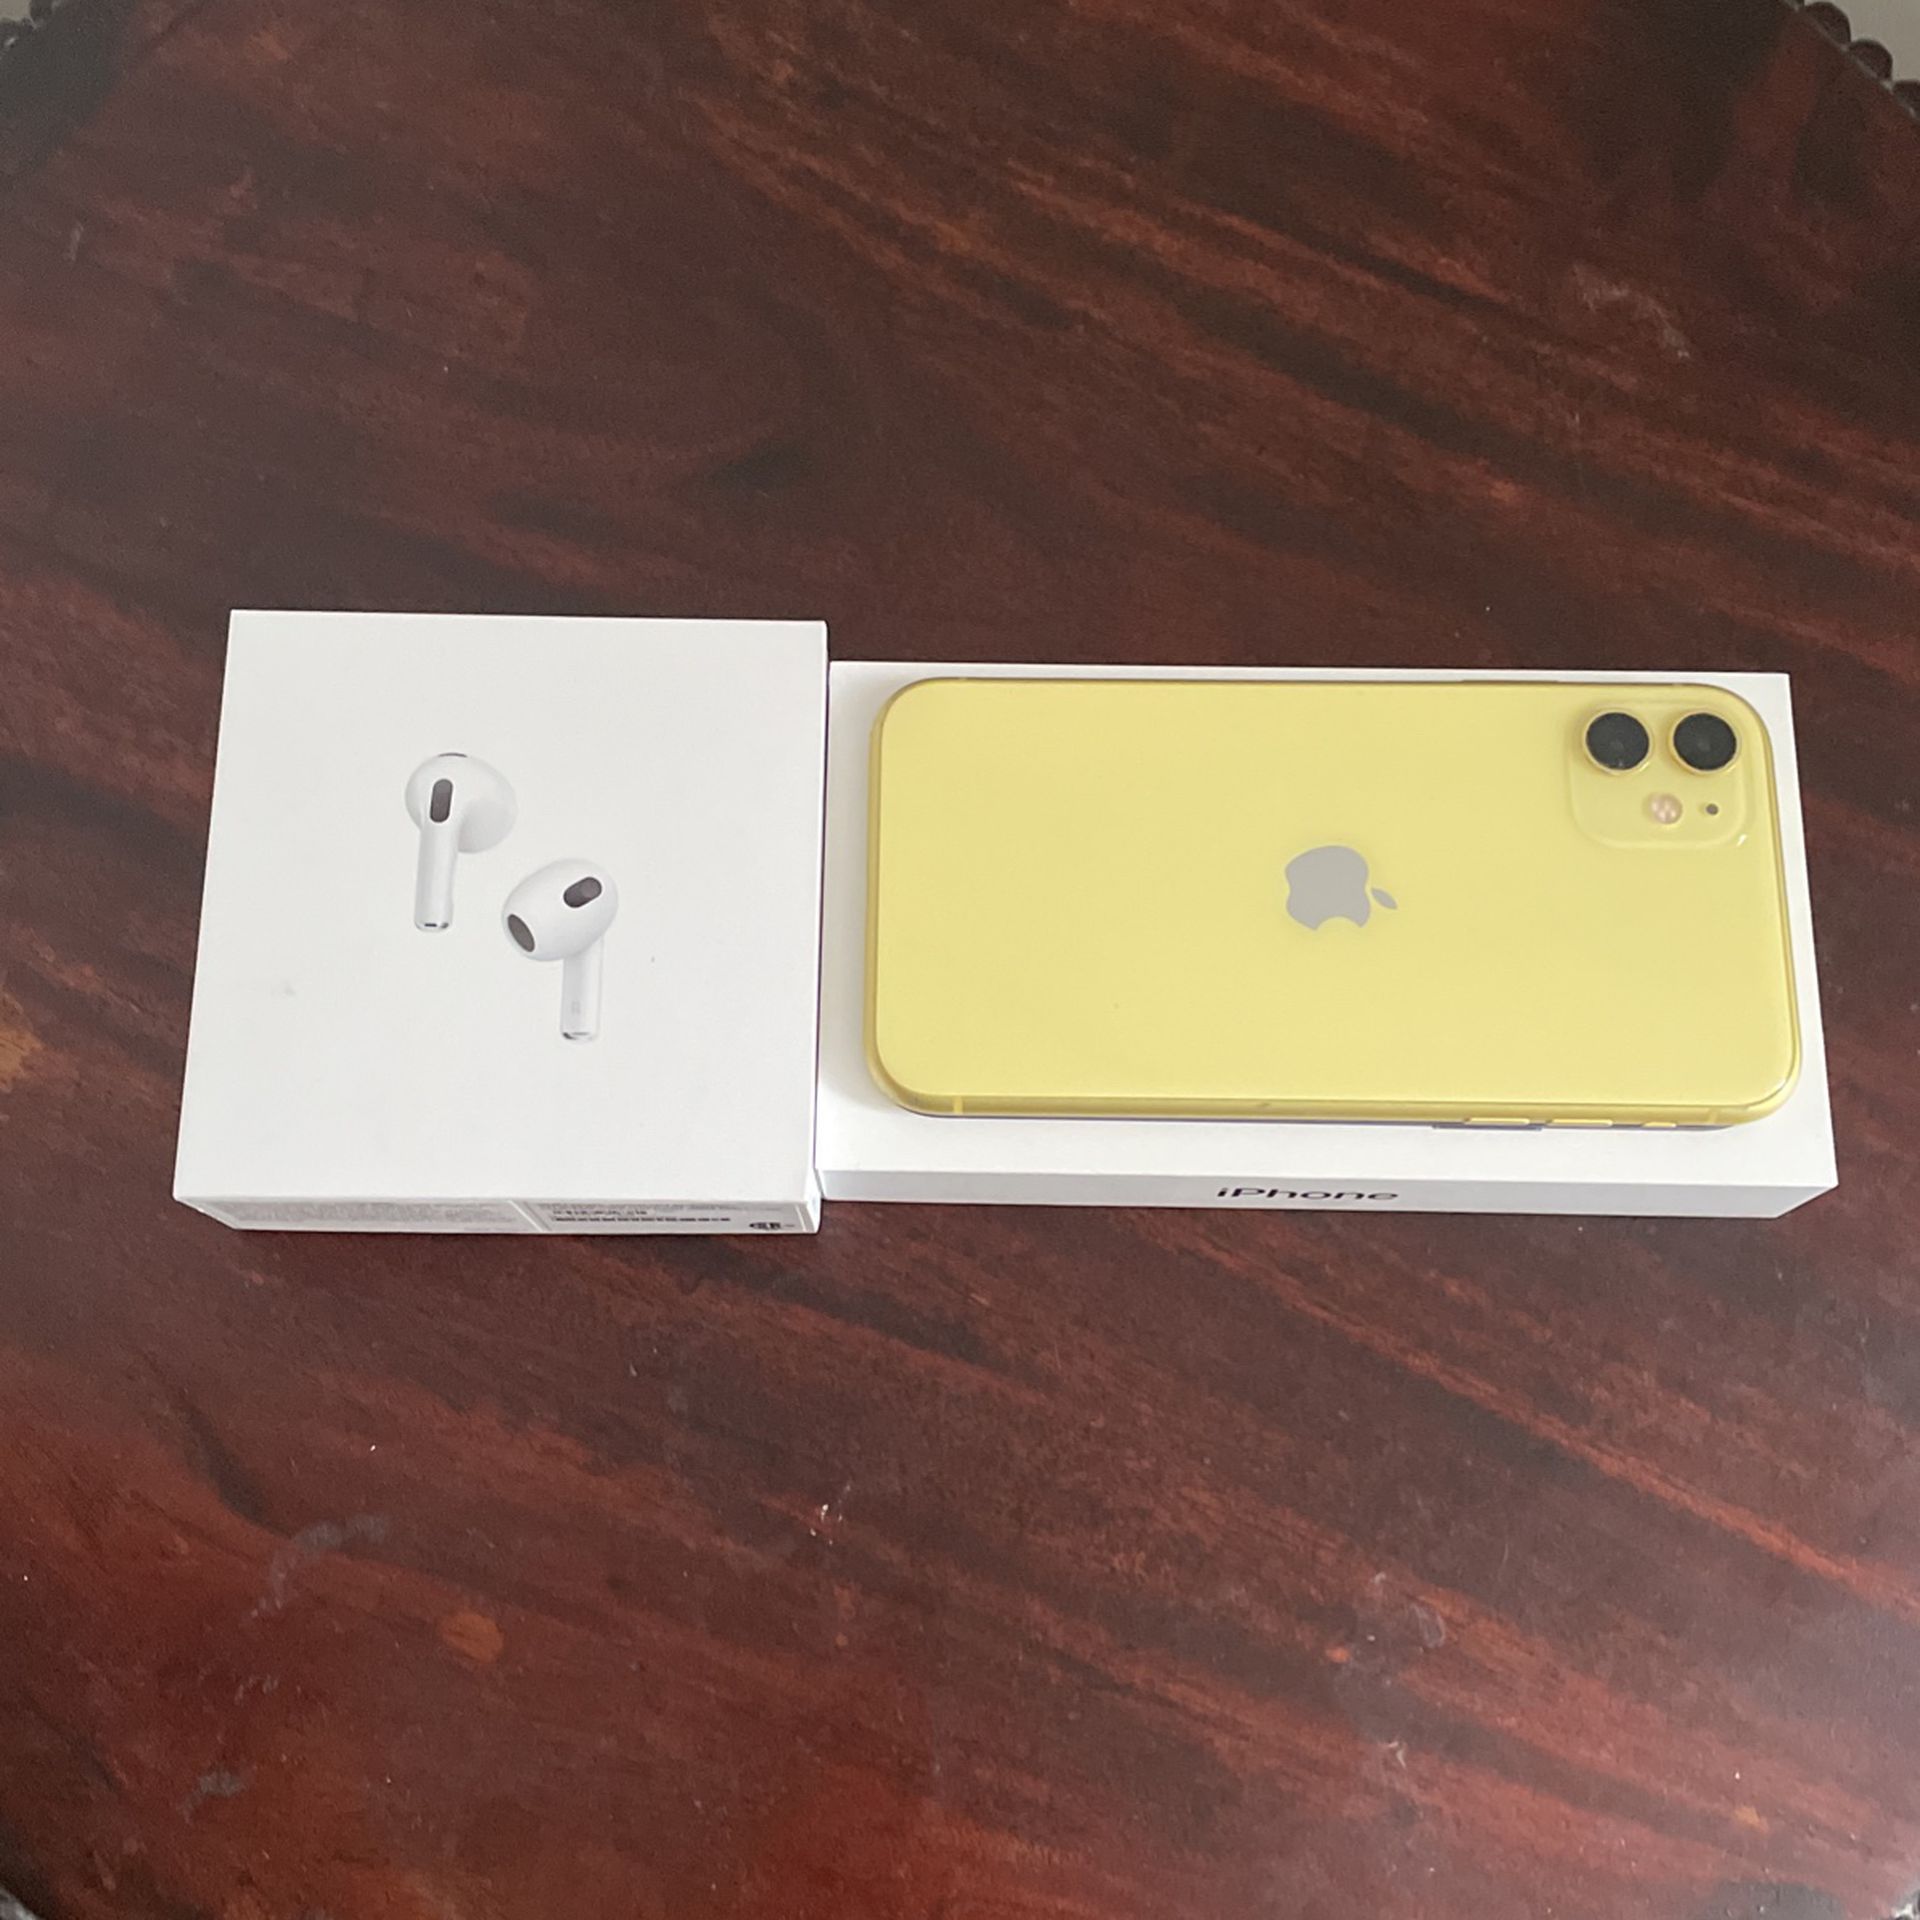 Apple iPhone 11 & AirPods